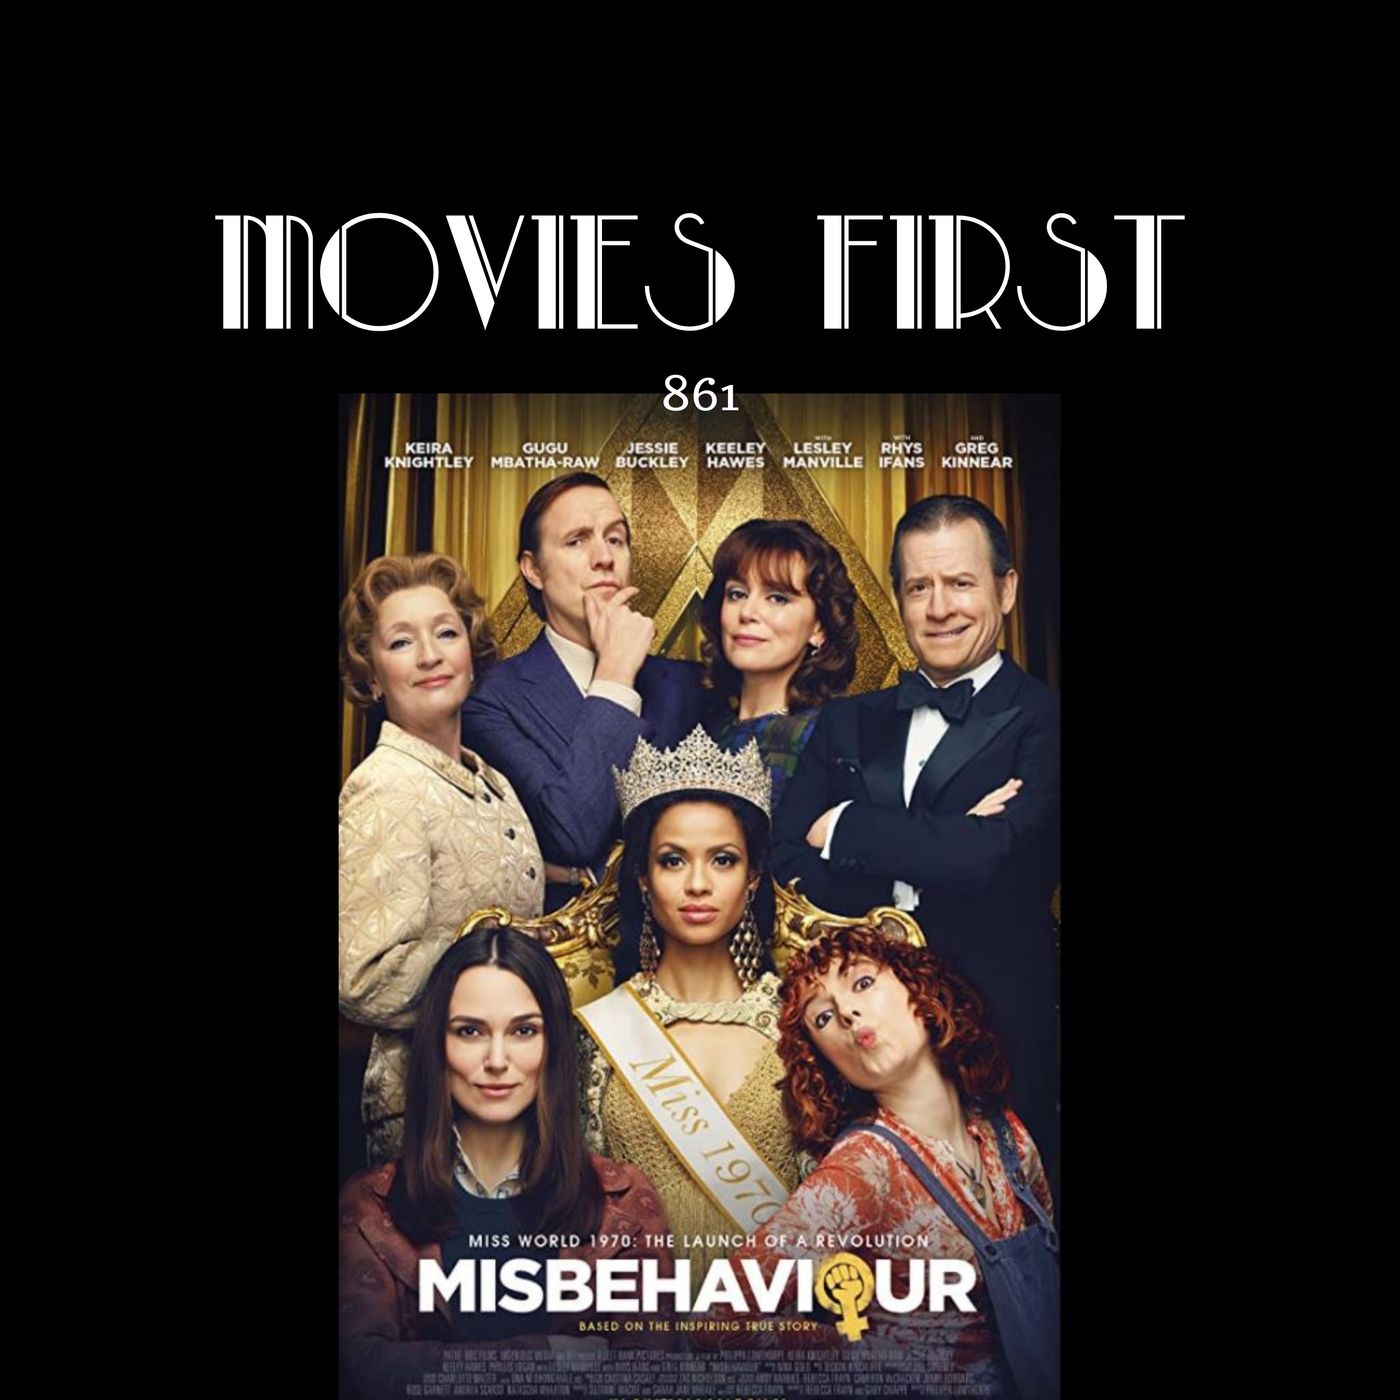 Misbehaviour (Comedy, Drama, History) (the @MoviesFirst review)